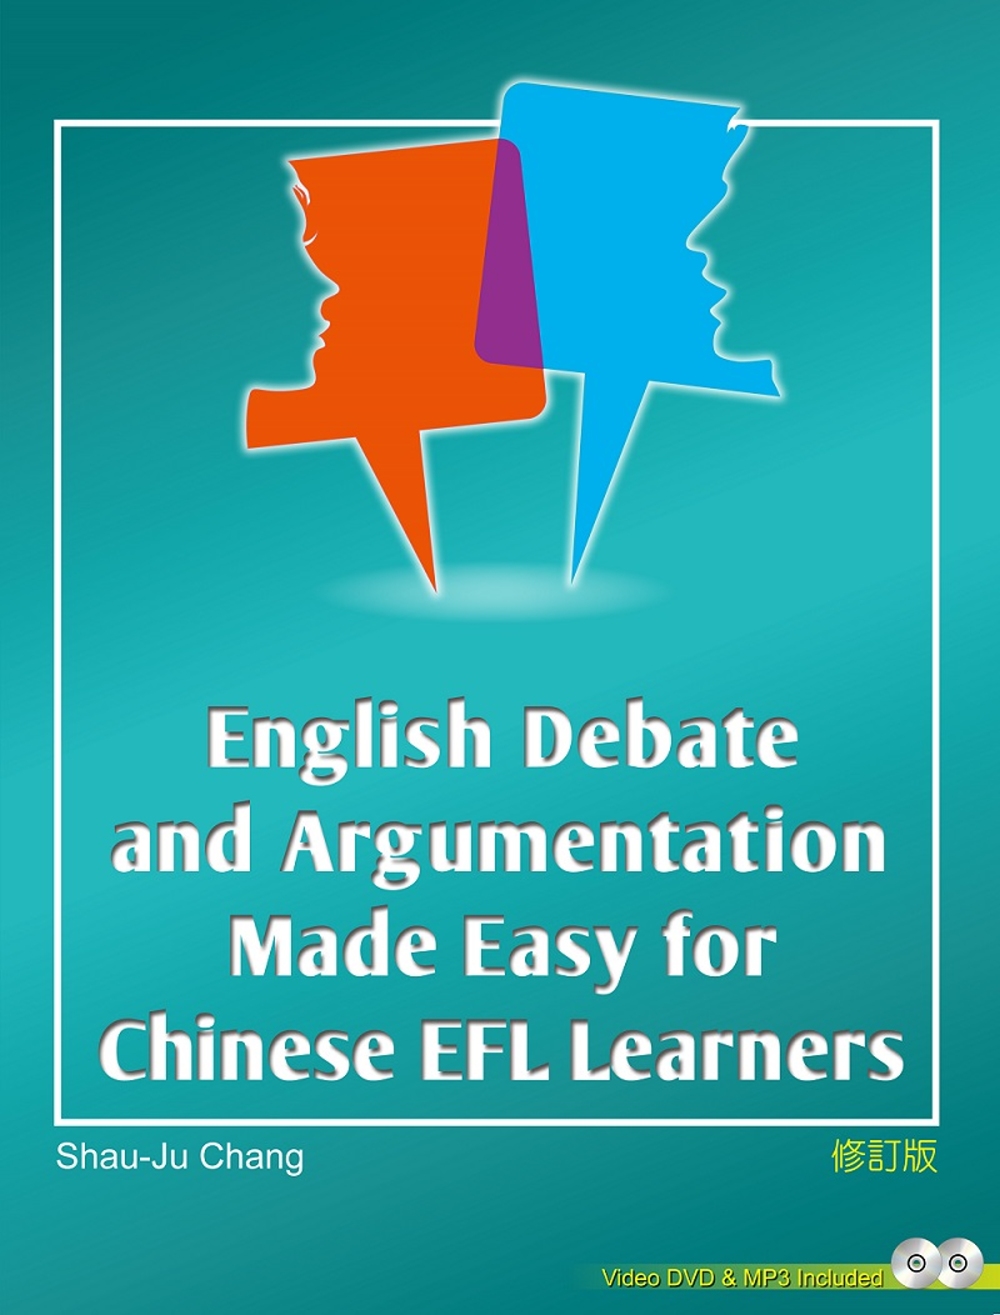 English Debate and Argumentation made Easy for Chinese EFL Learners(with Video & MP3)(修訂版)